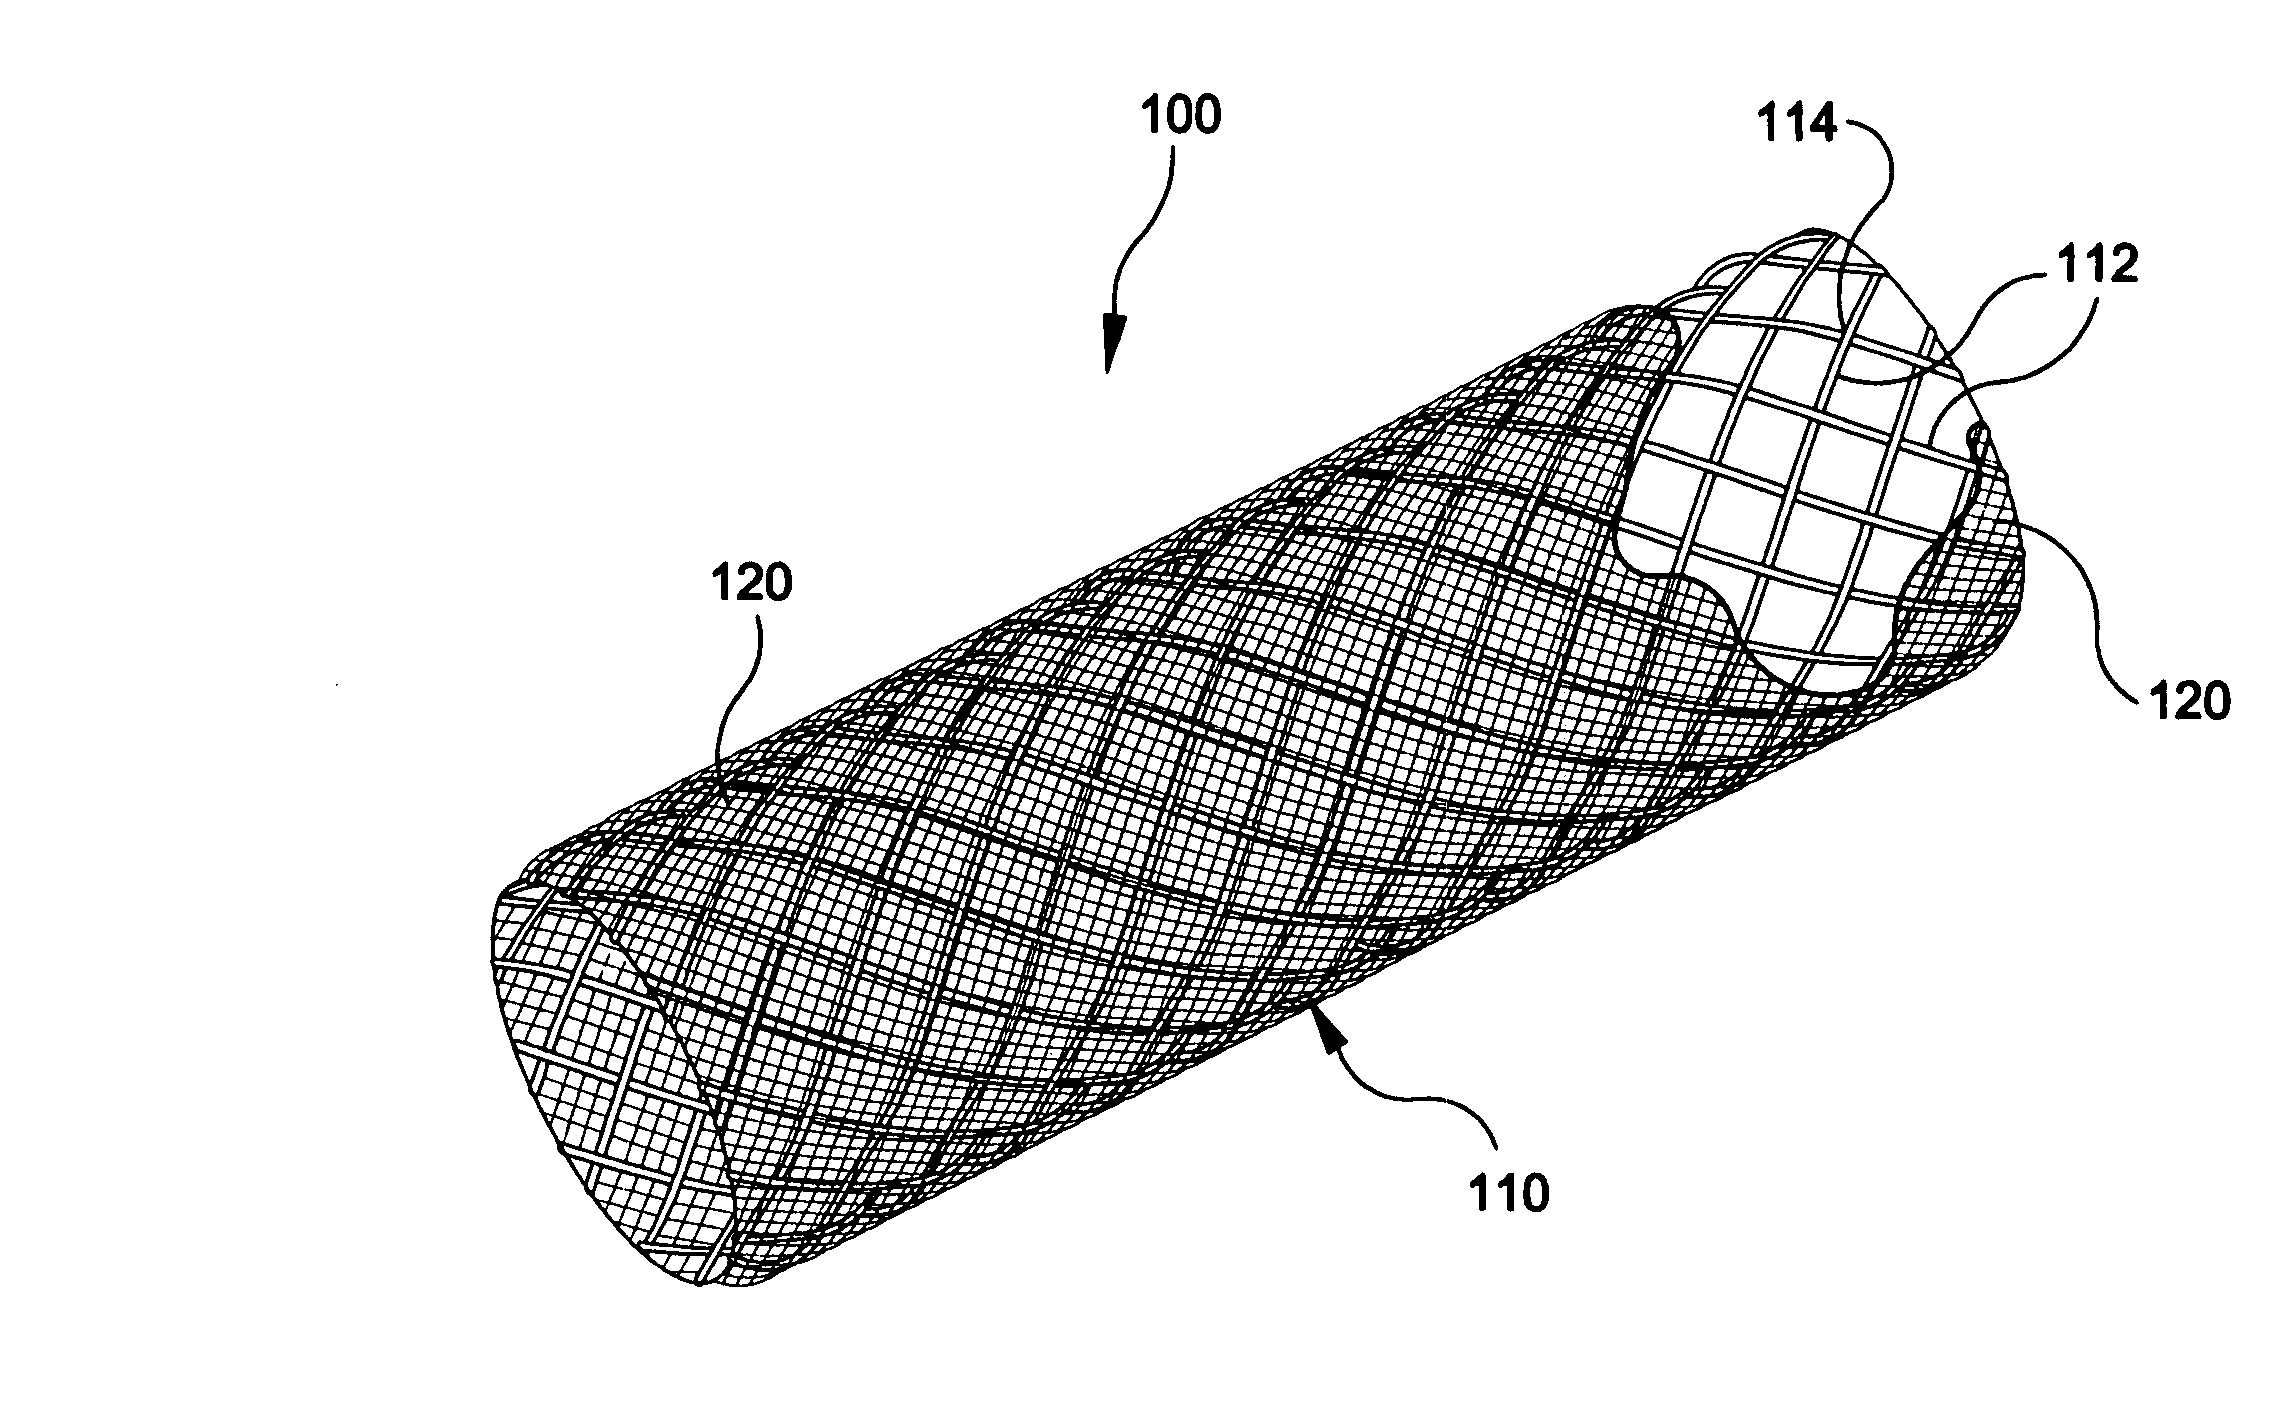 Stent-graft with bioabsorbable structural support